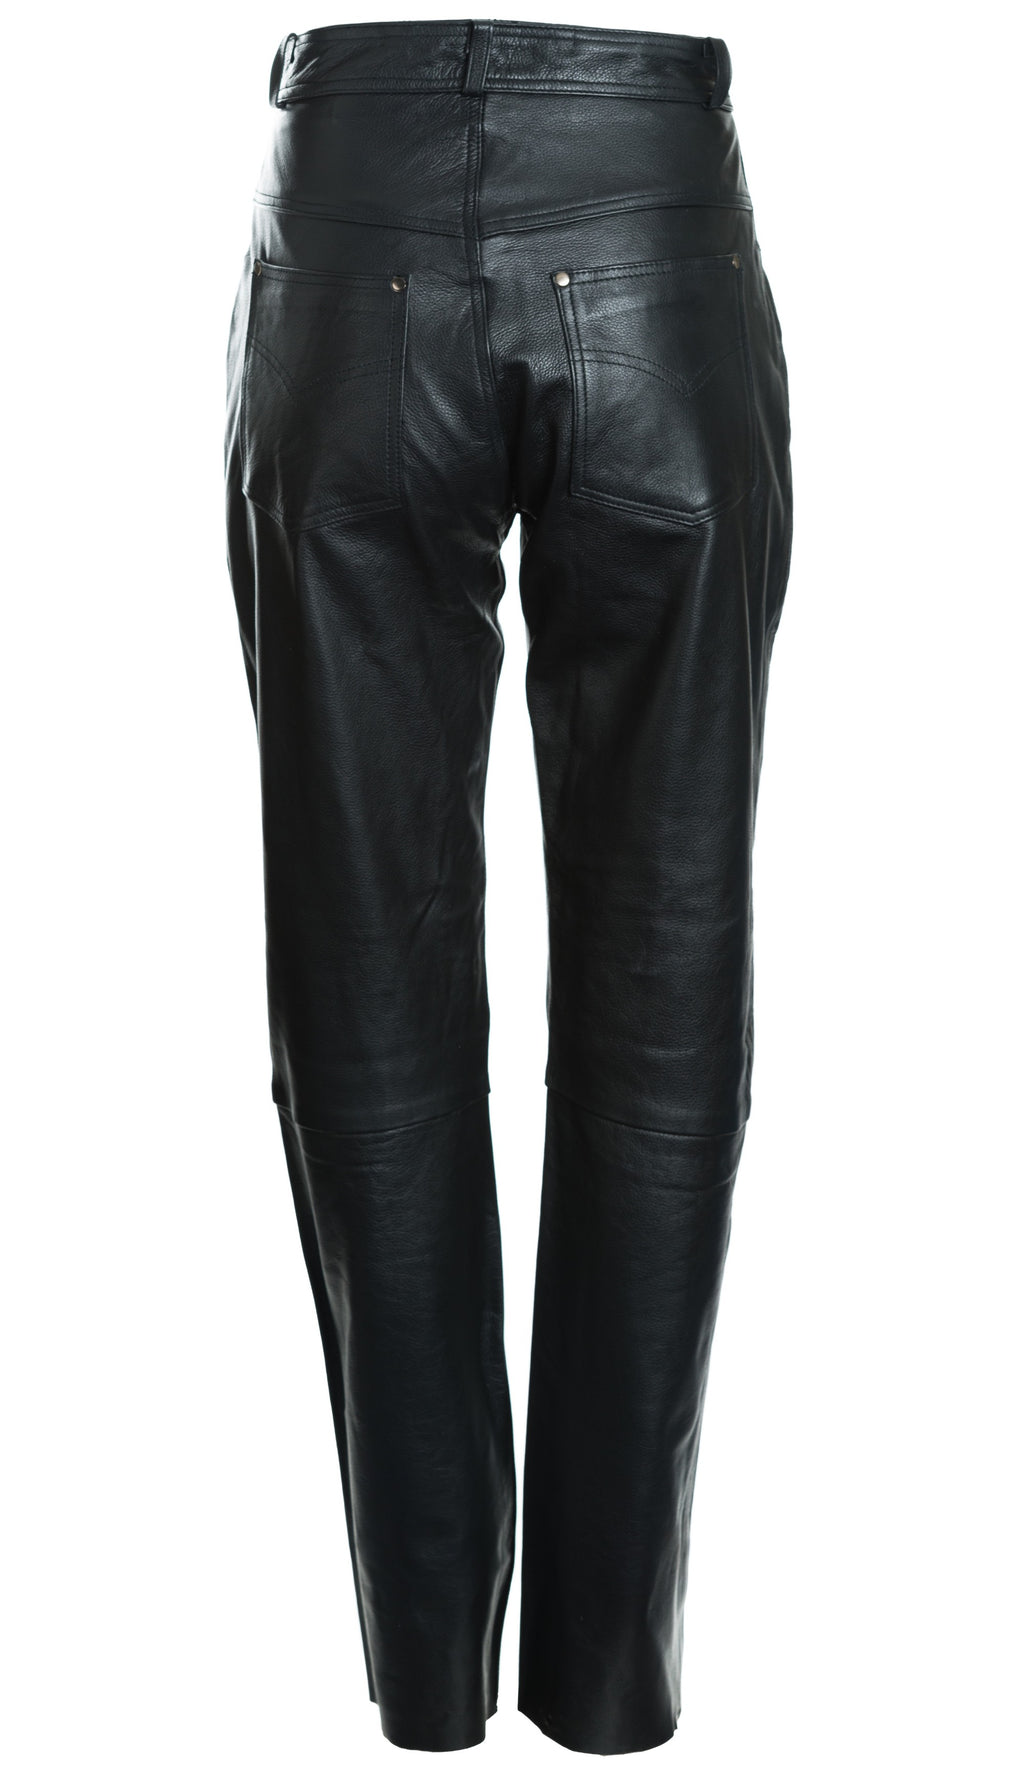 Mens Cow Hide Leather Jeans Style Trousers